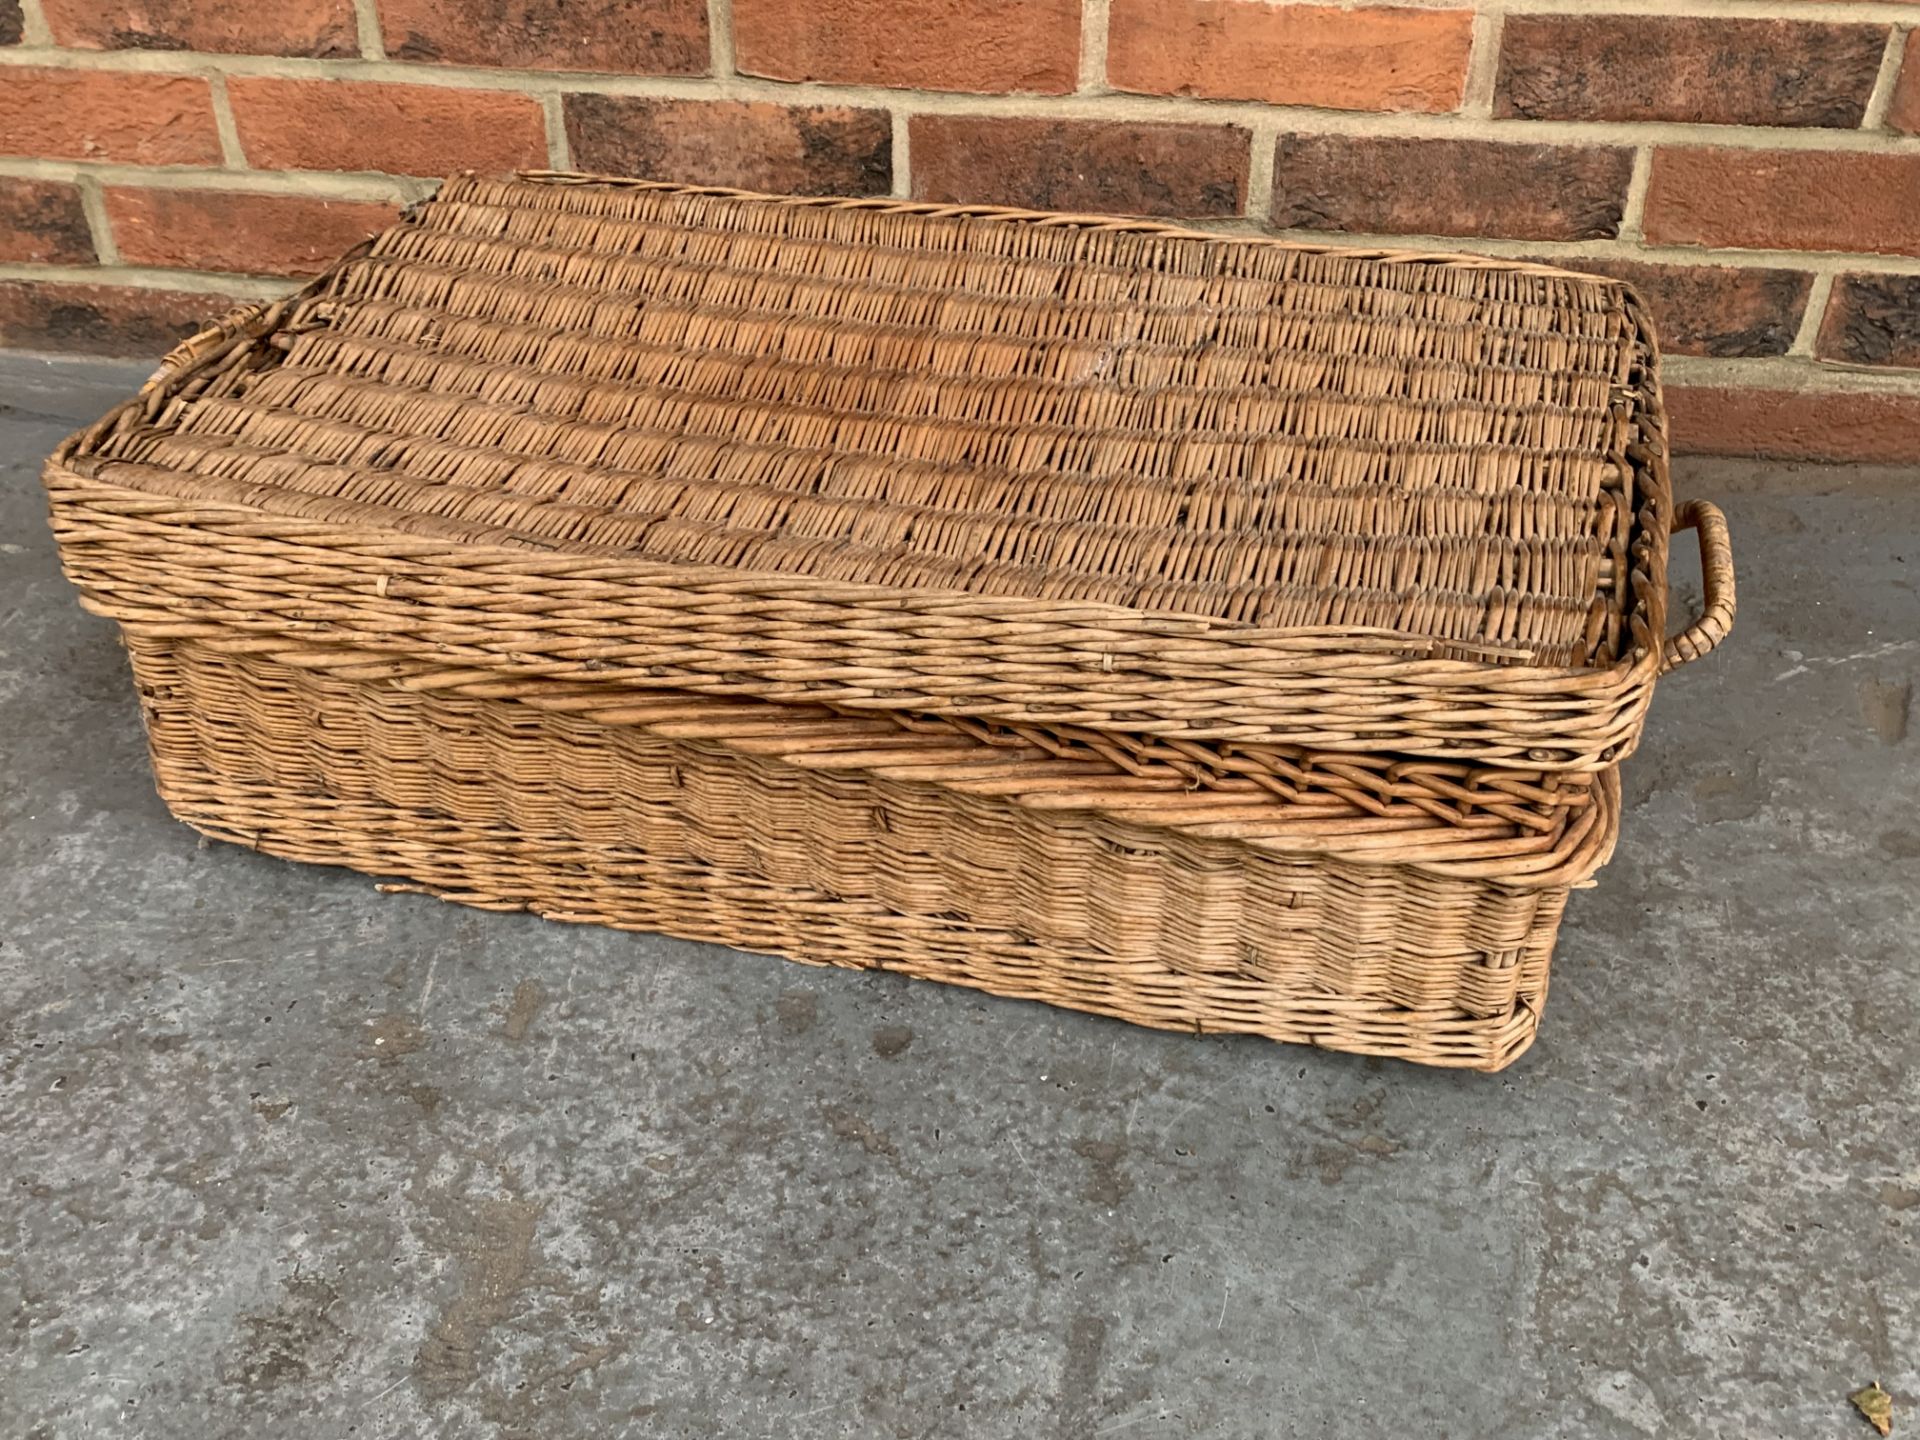 Vintage Wicker Picnic Basket with Contents - Image 4 of 4